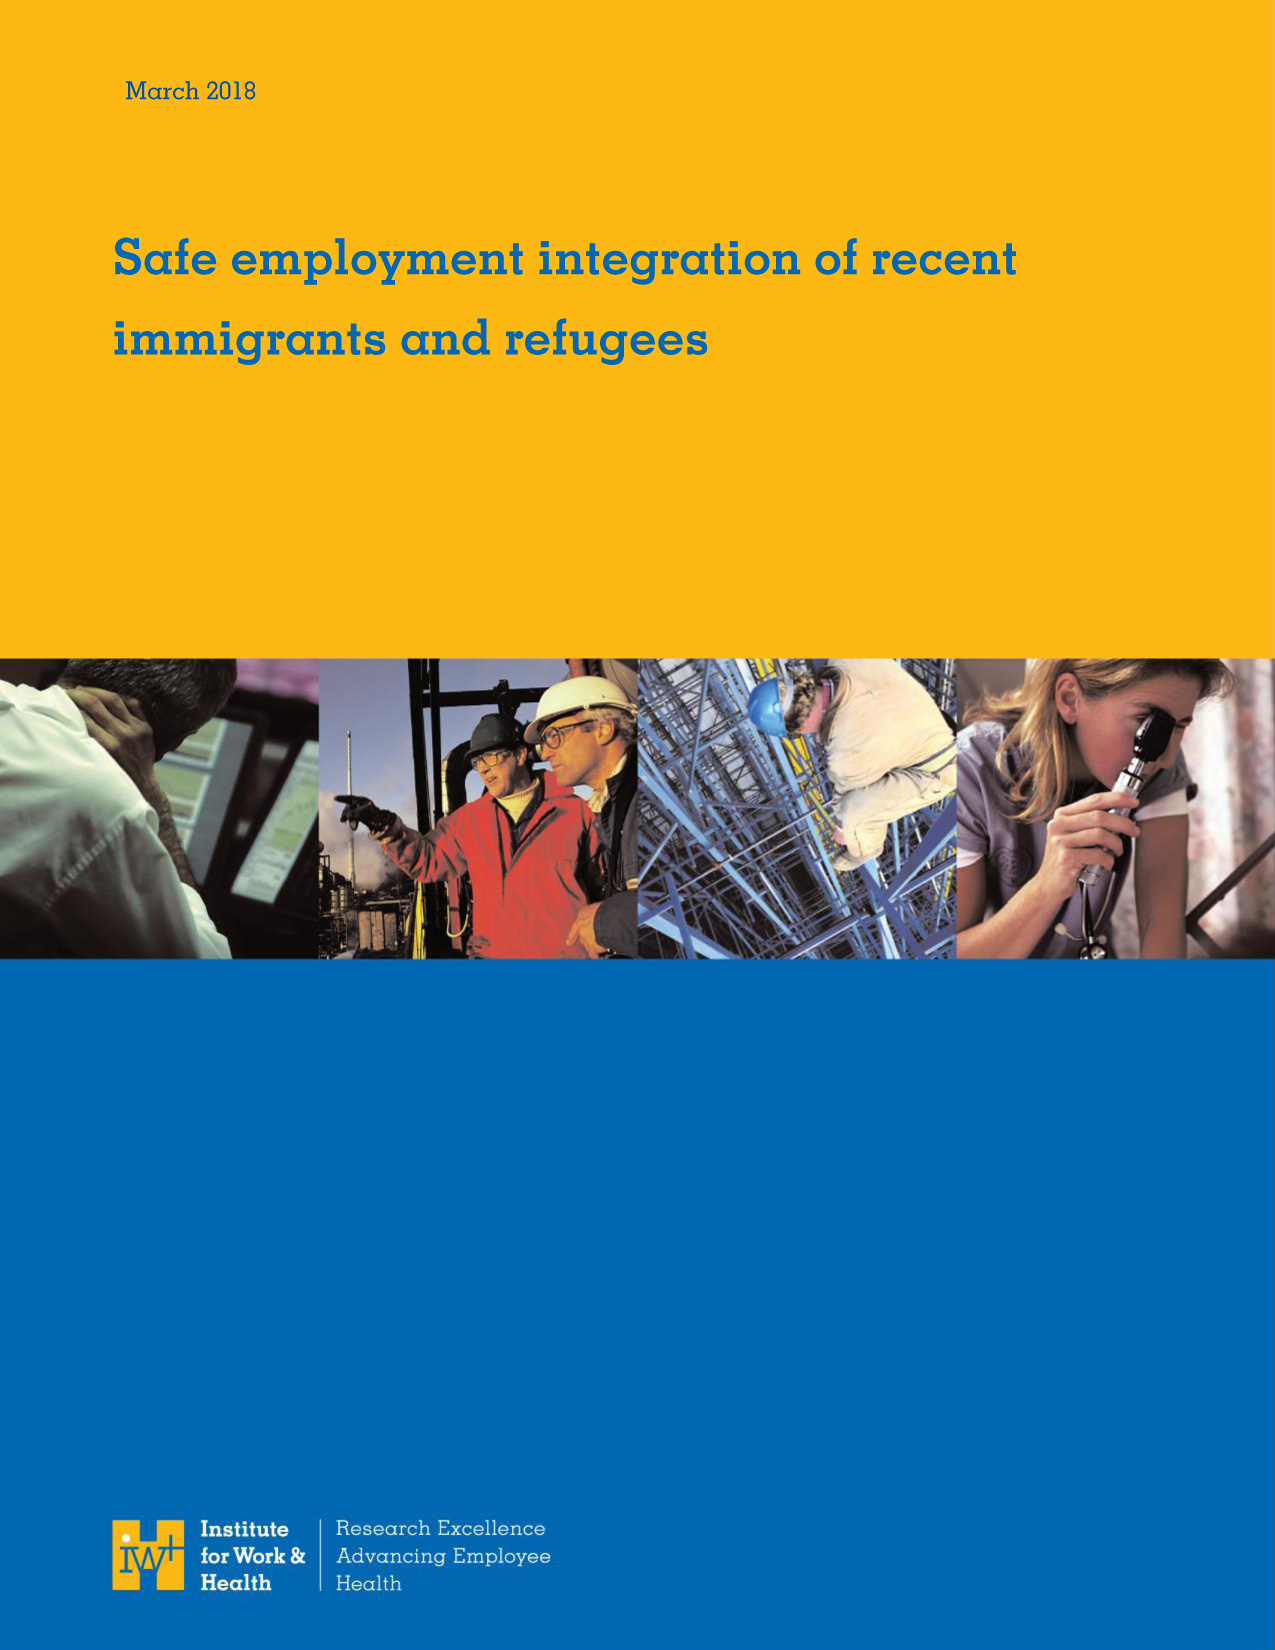 Cover of study report